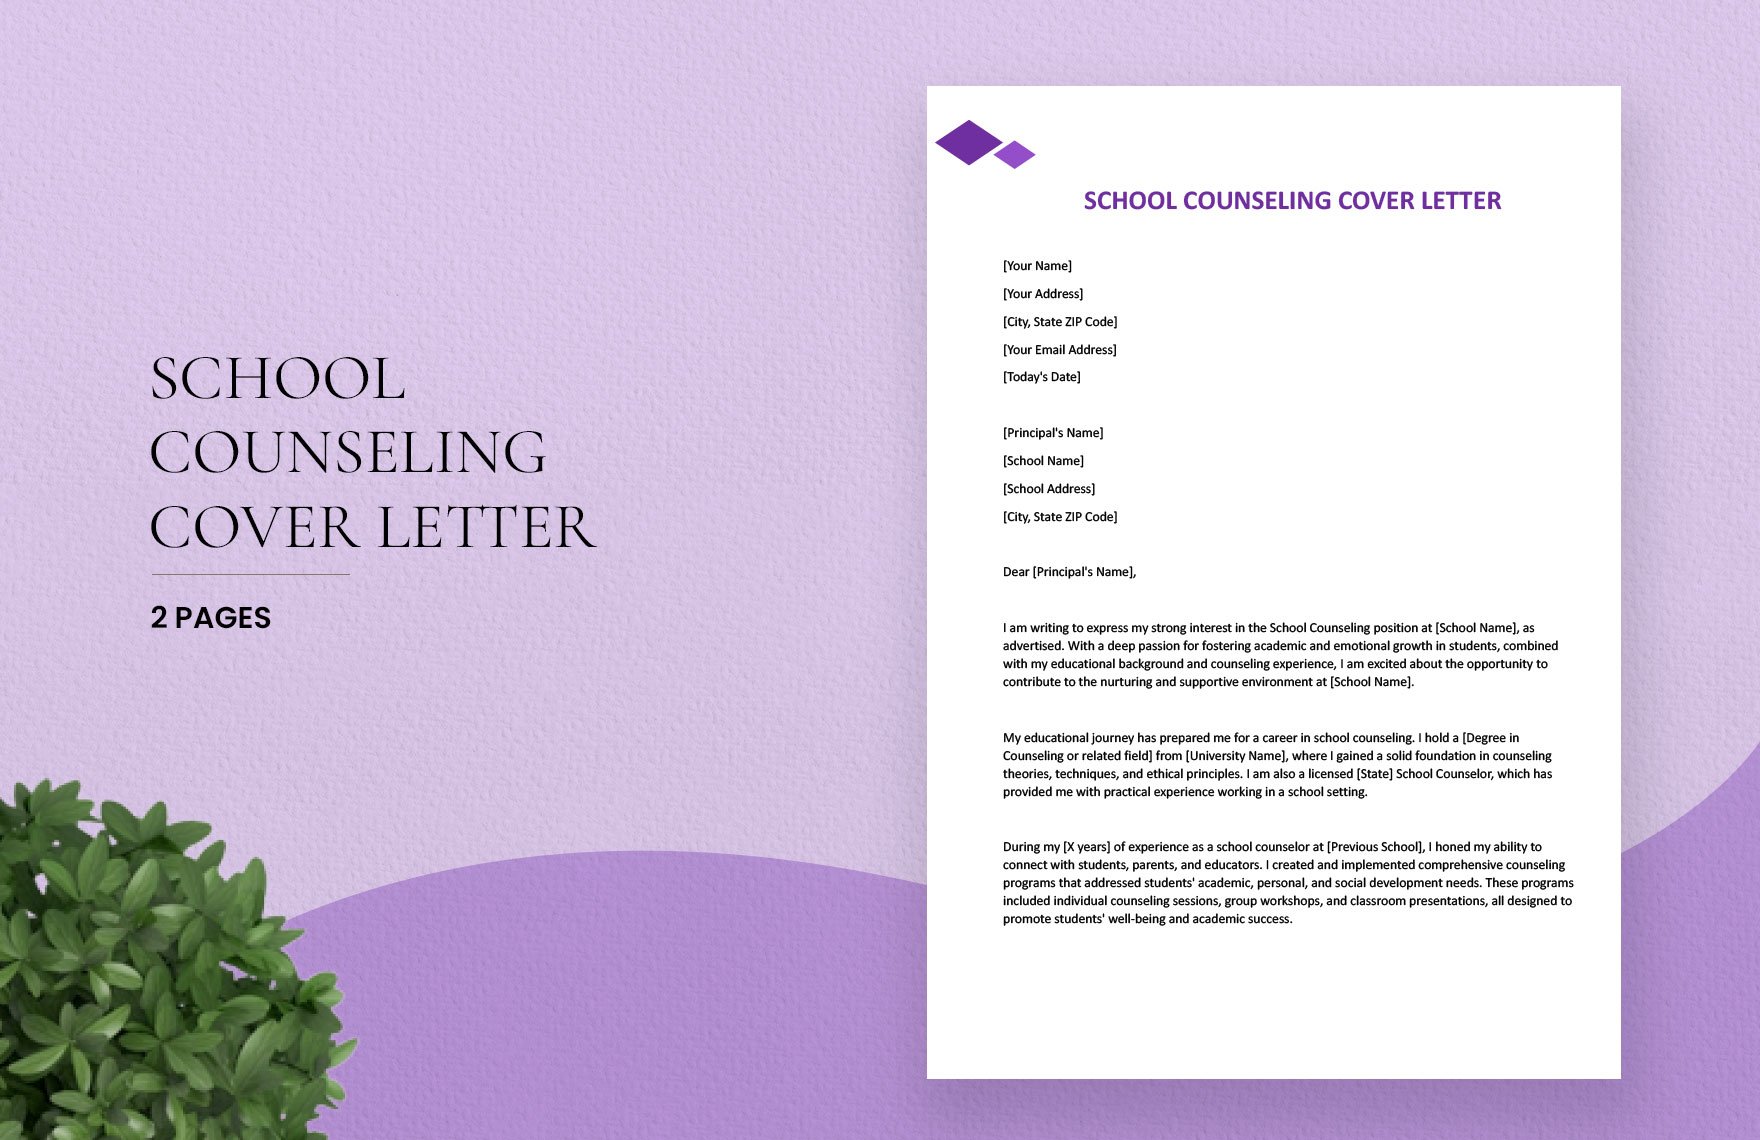 School Counseling Cover Letter